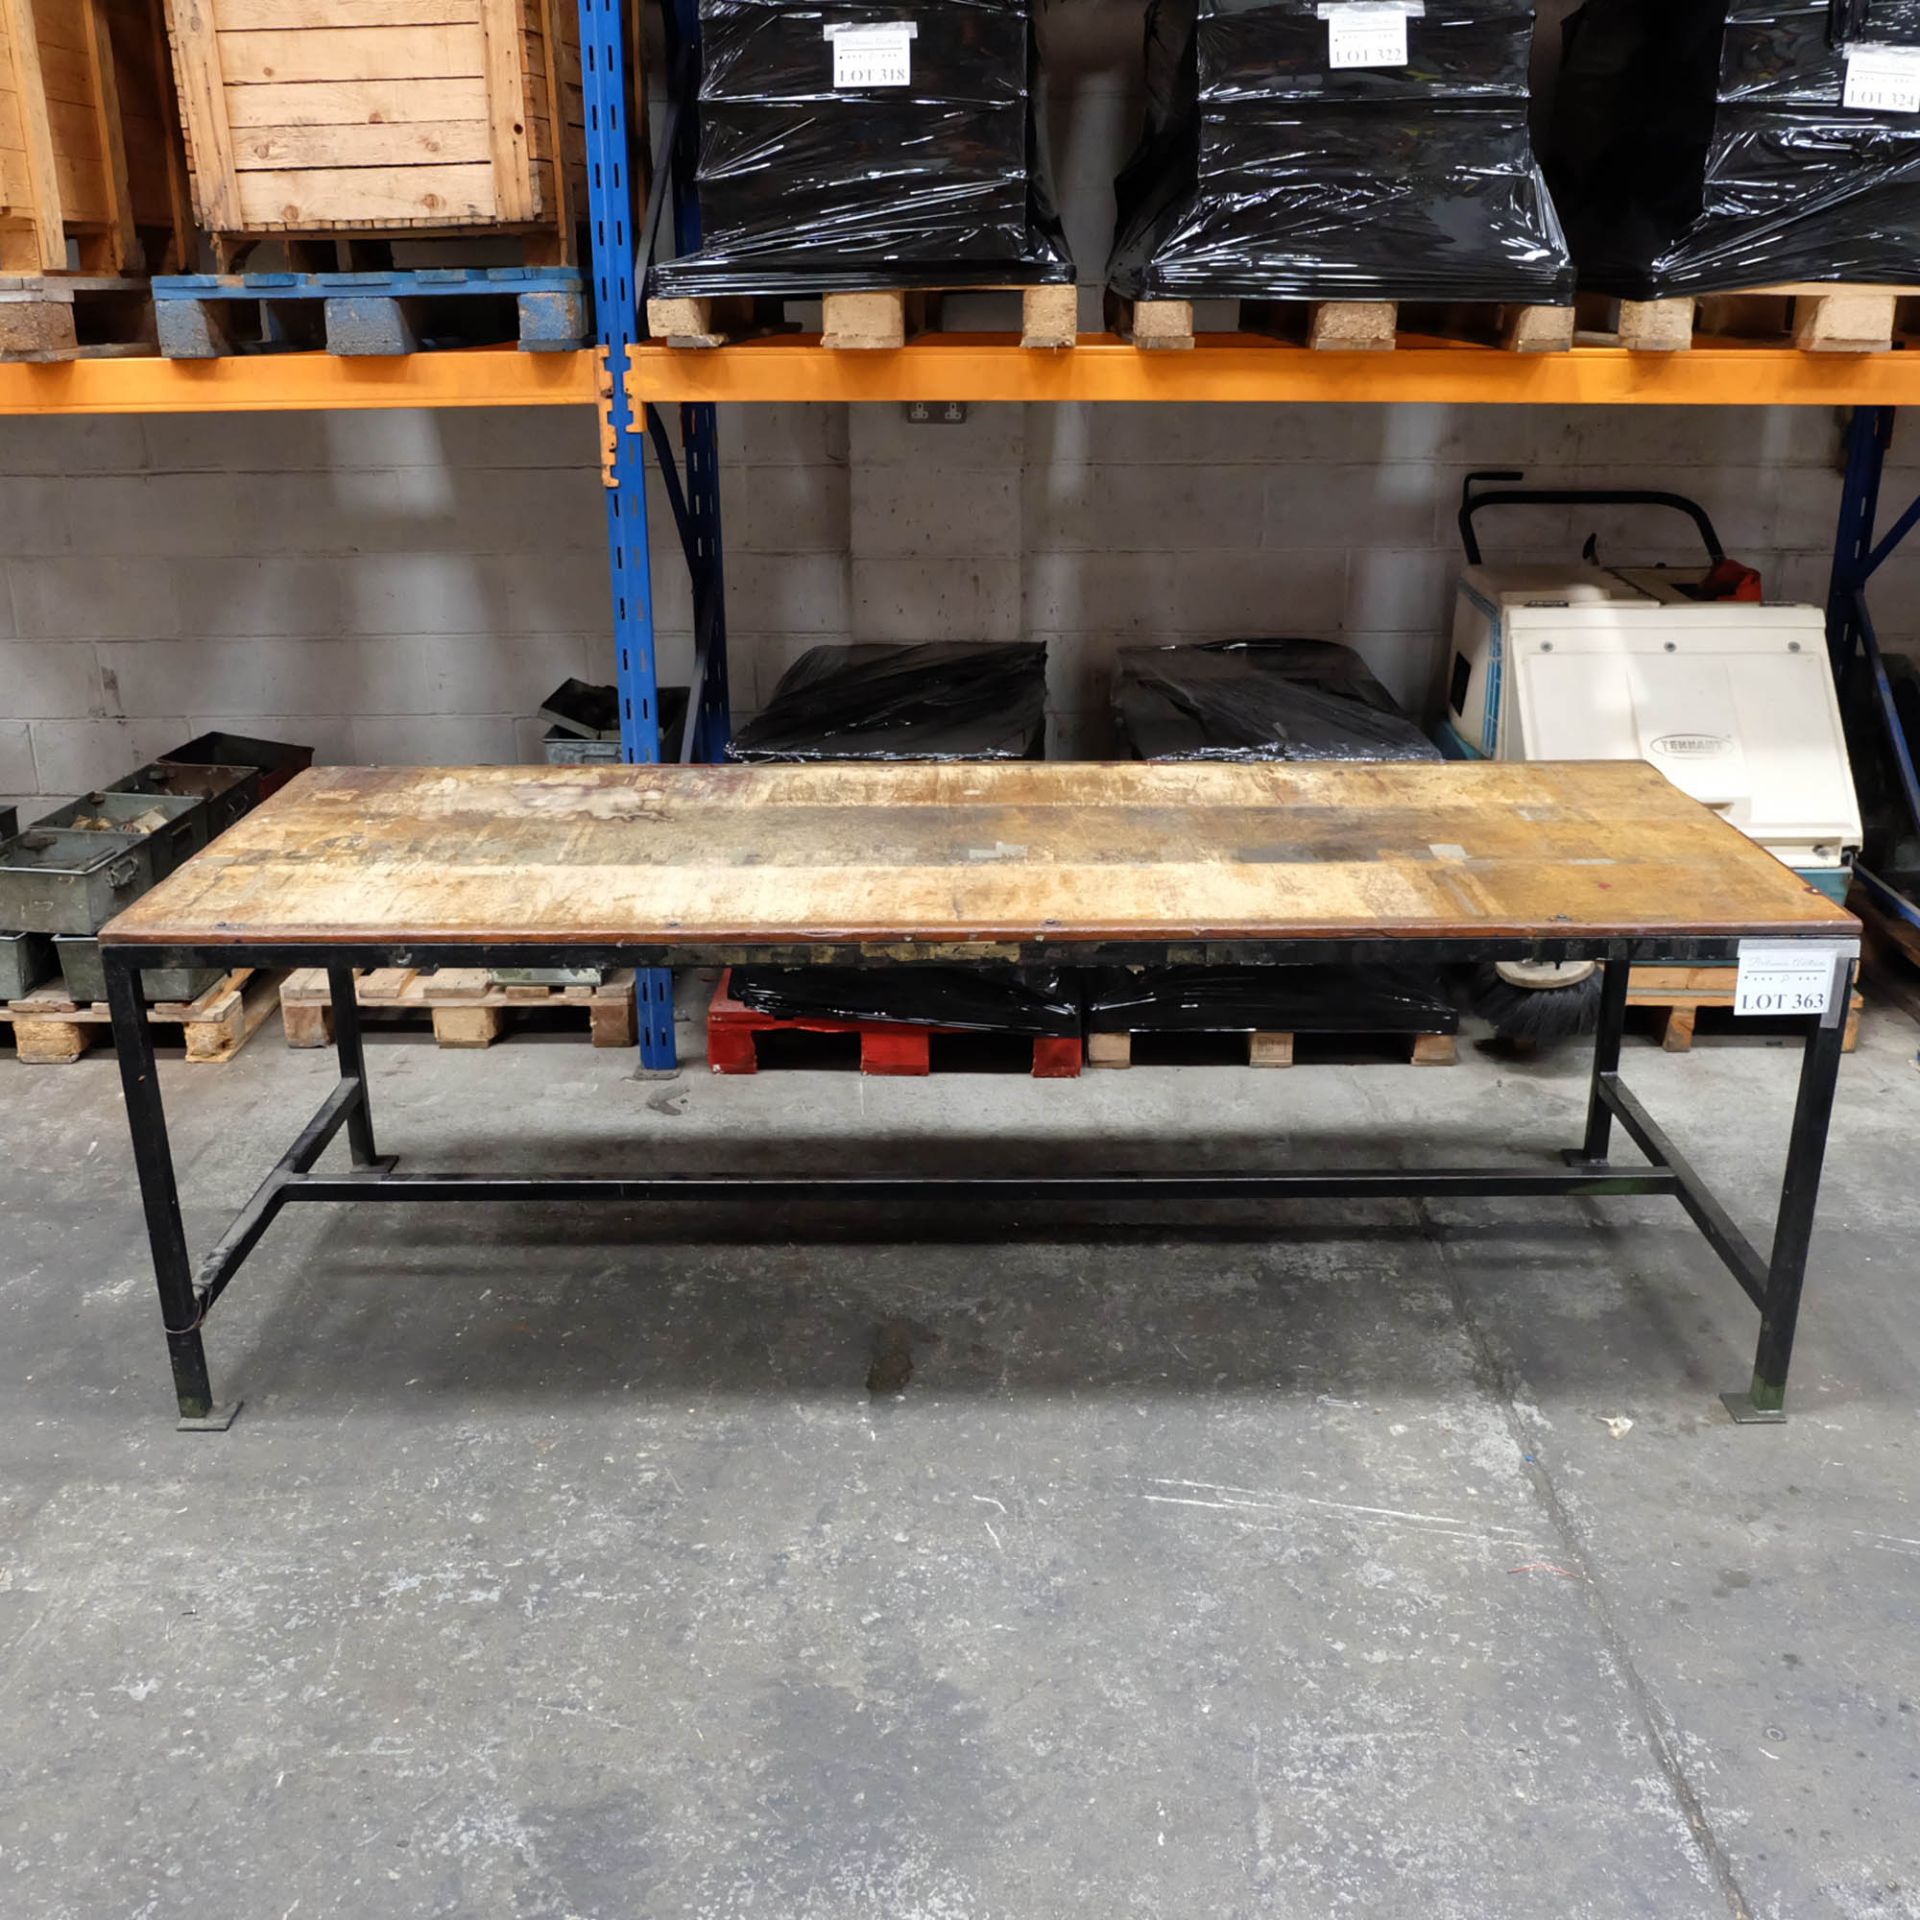 Work Bench Size 8ft x 3ft x 31" High Wooden Top On Steel Stand